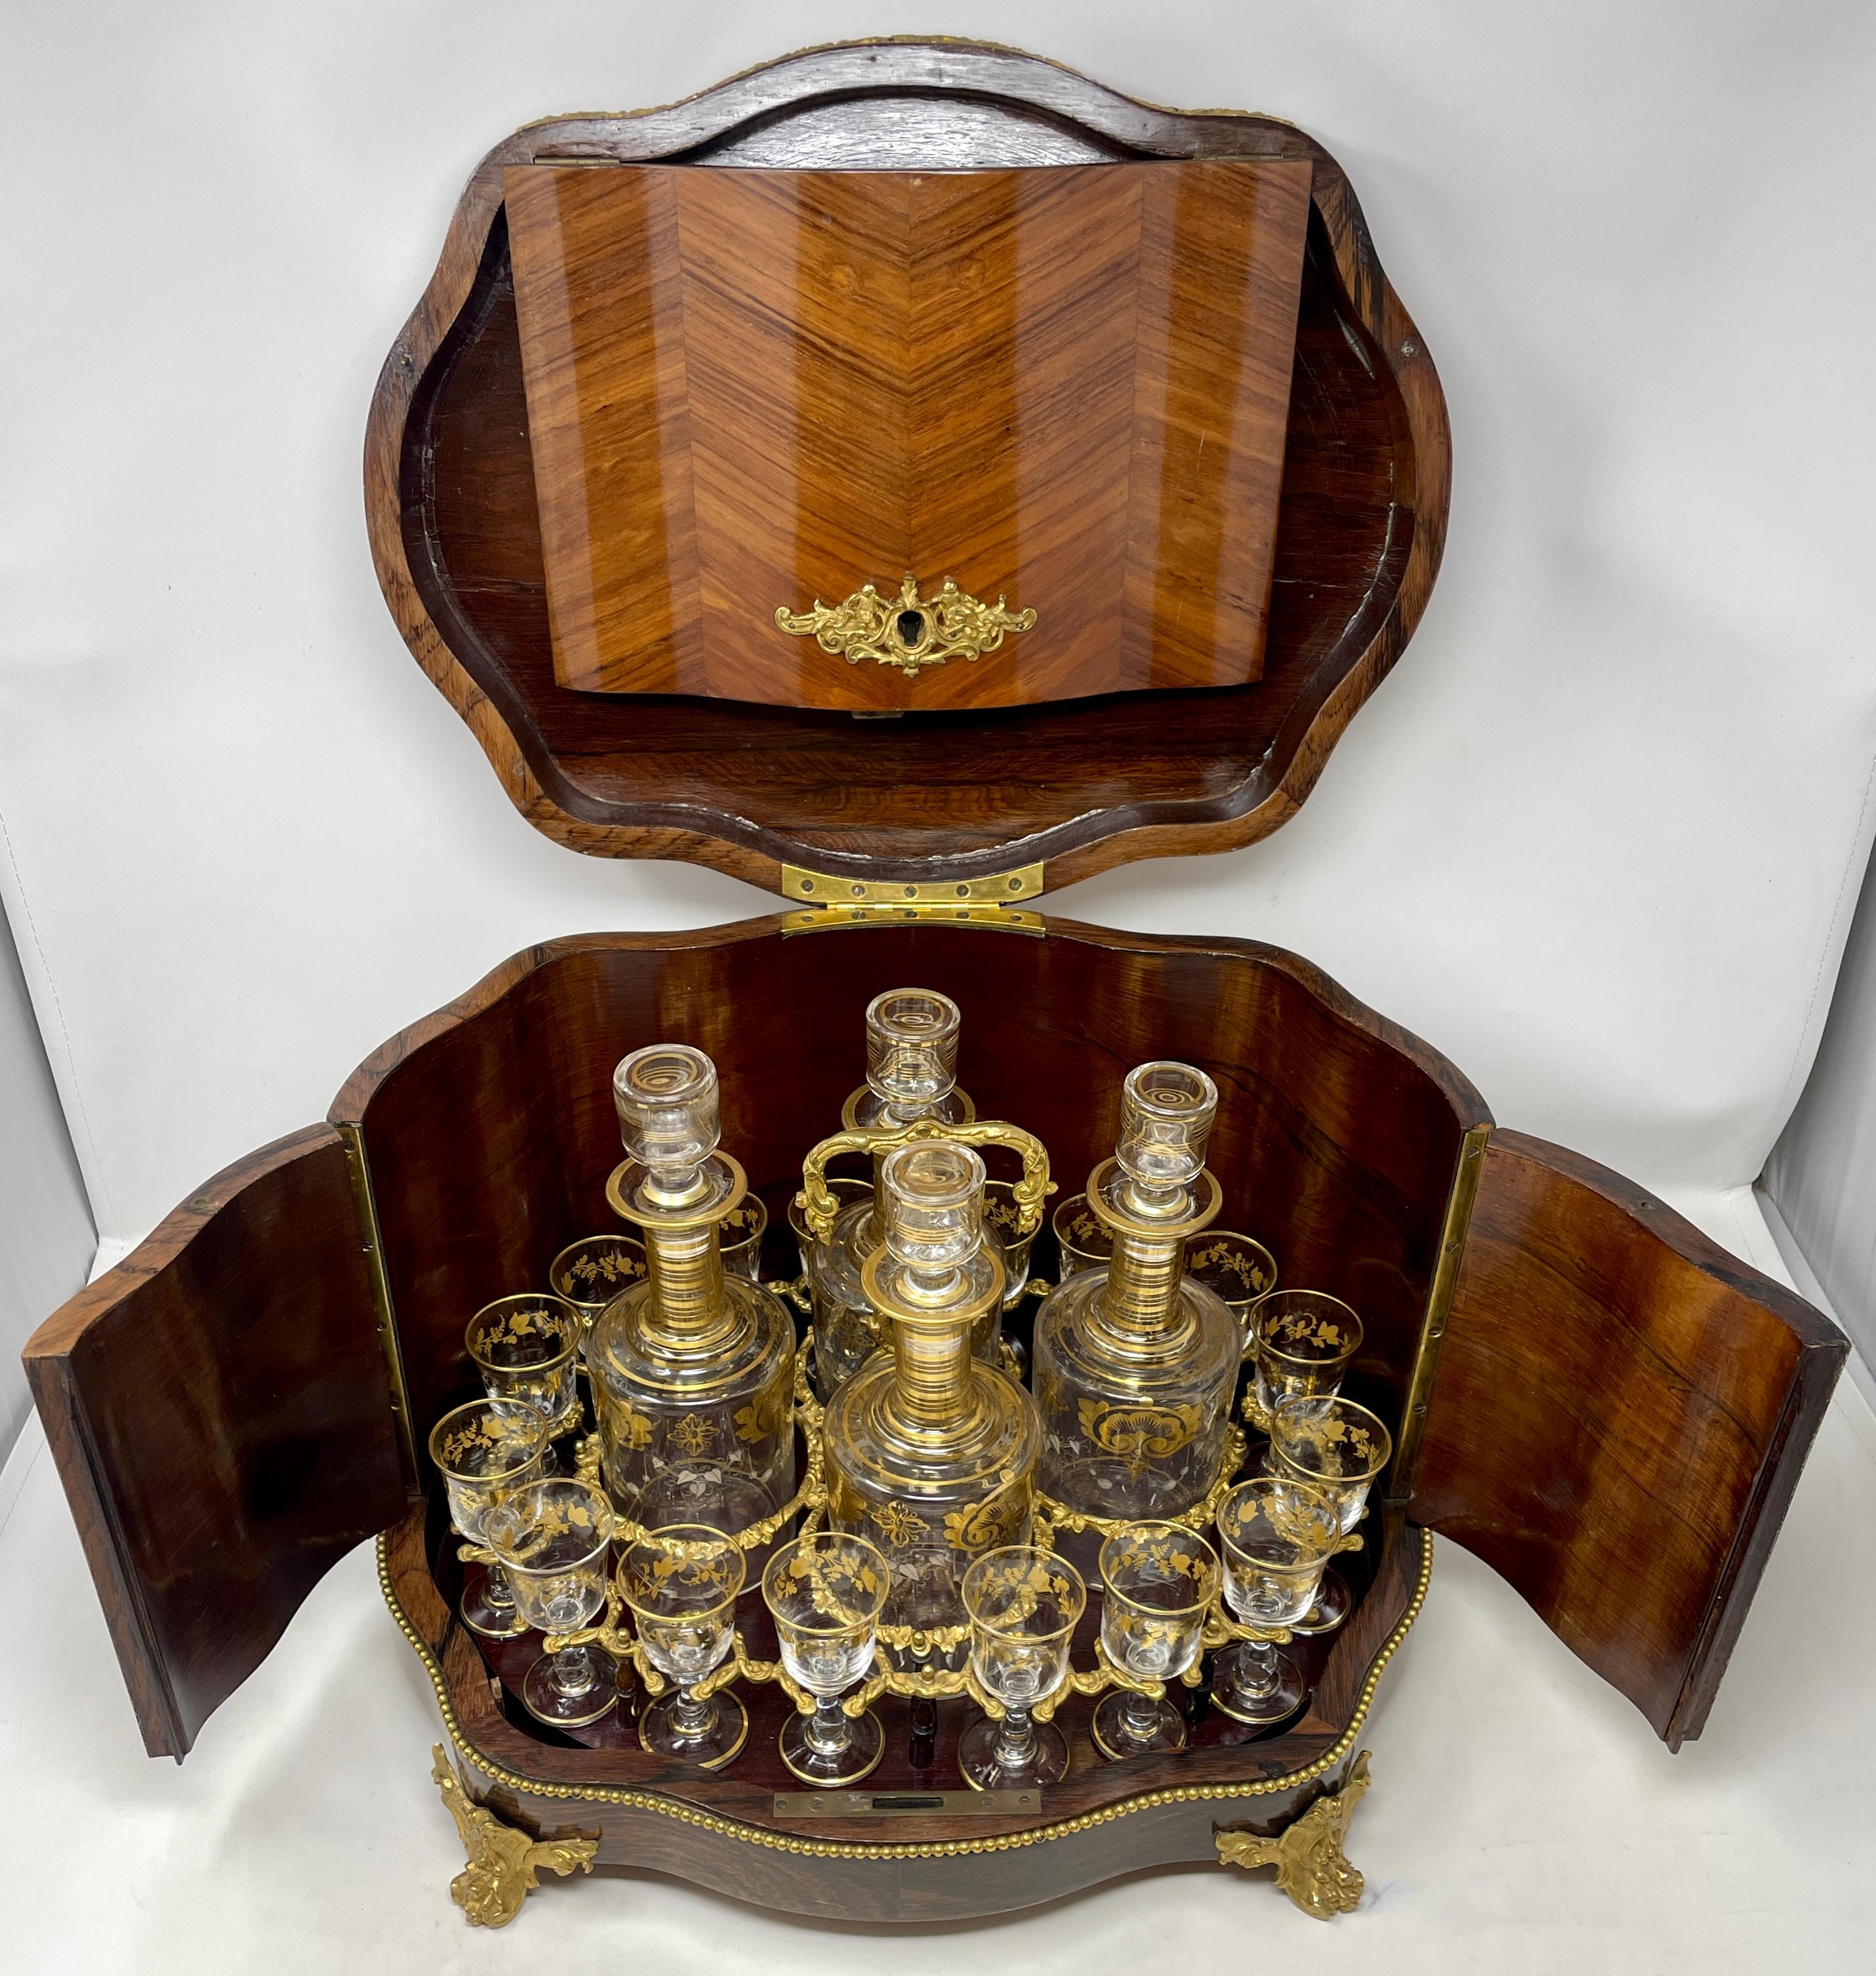 Superb antique French baccarat crystal and gold bronze Cave À Liqueur in fitted satinwood case, circa 1885-1890.